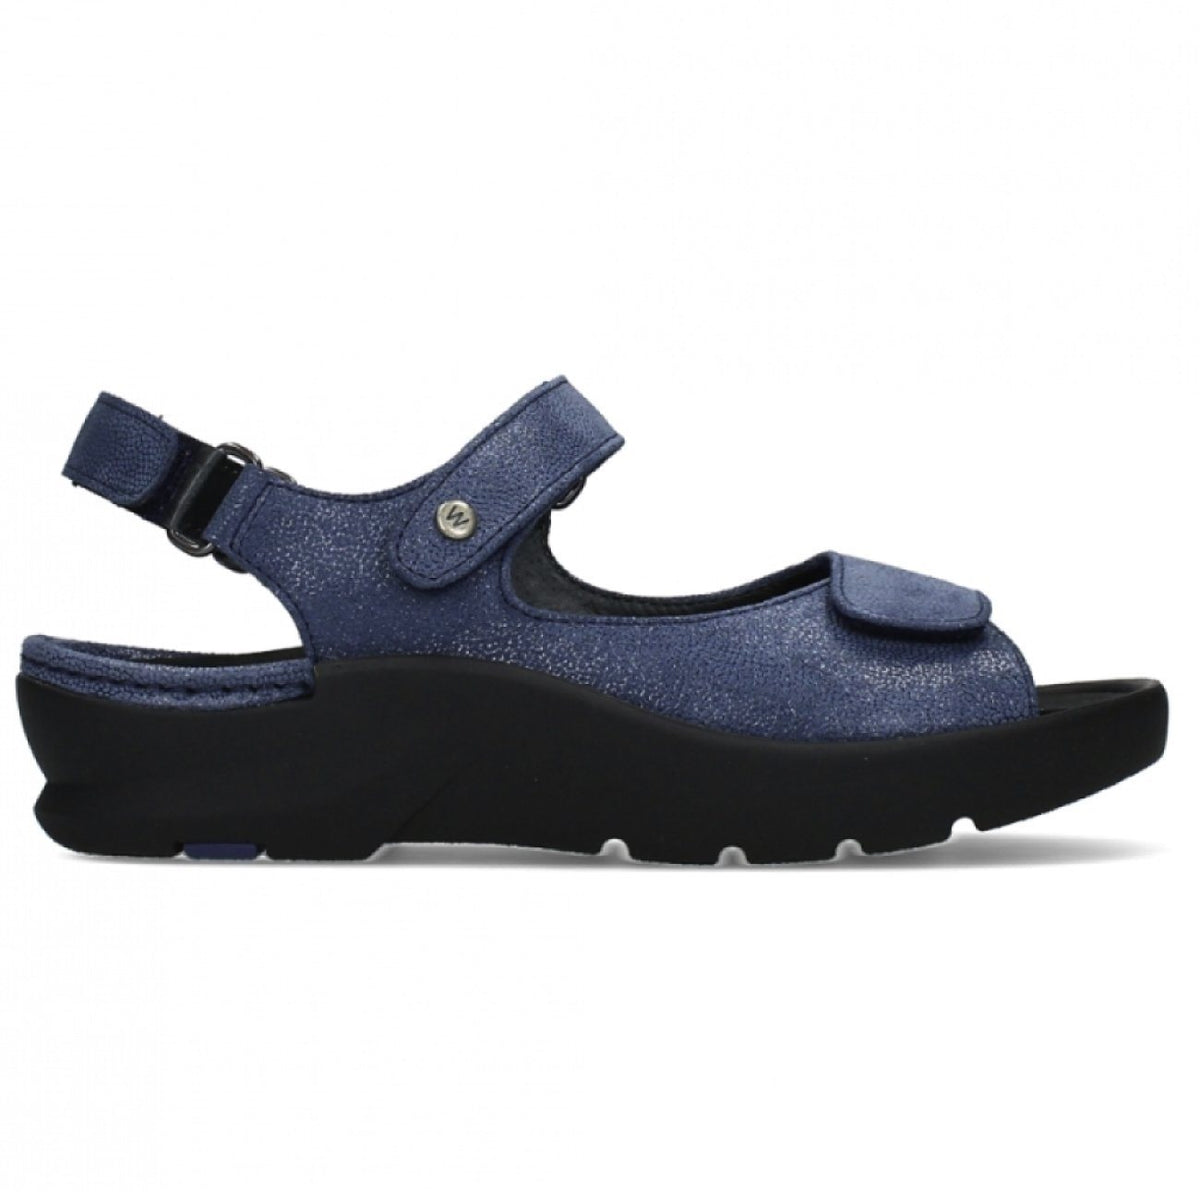 Wolky, Delft, Sandals, Leather, Denim Sandals Wolky 